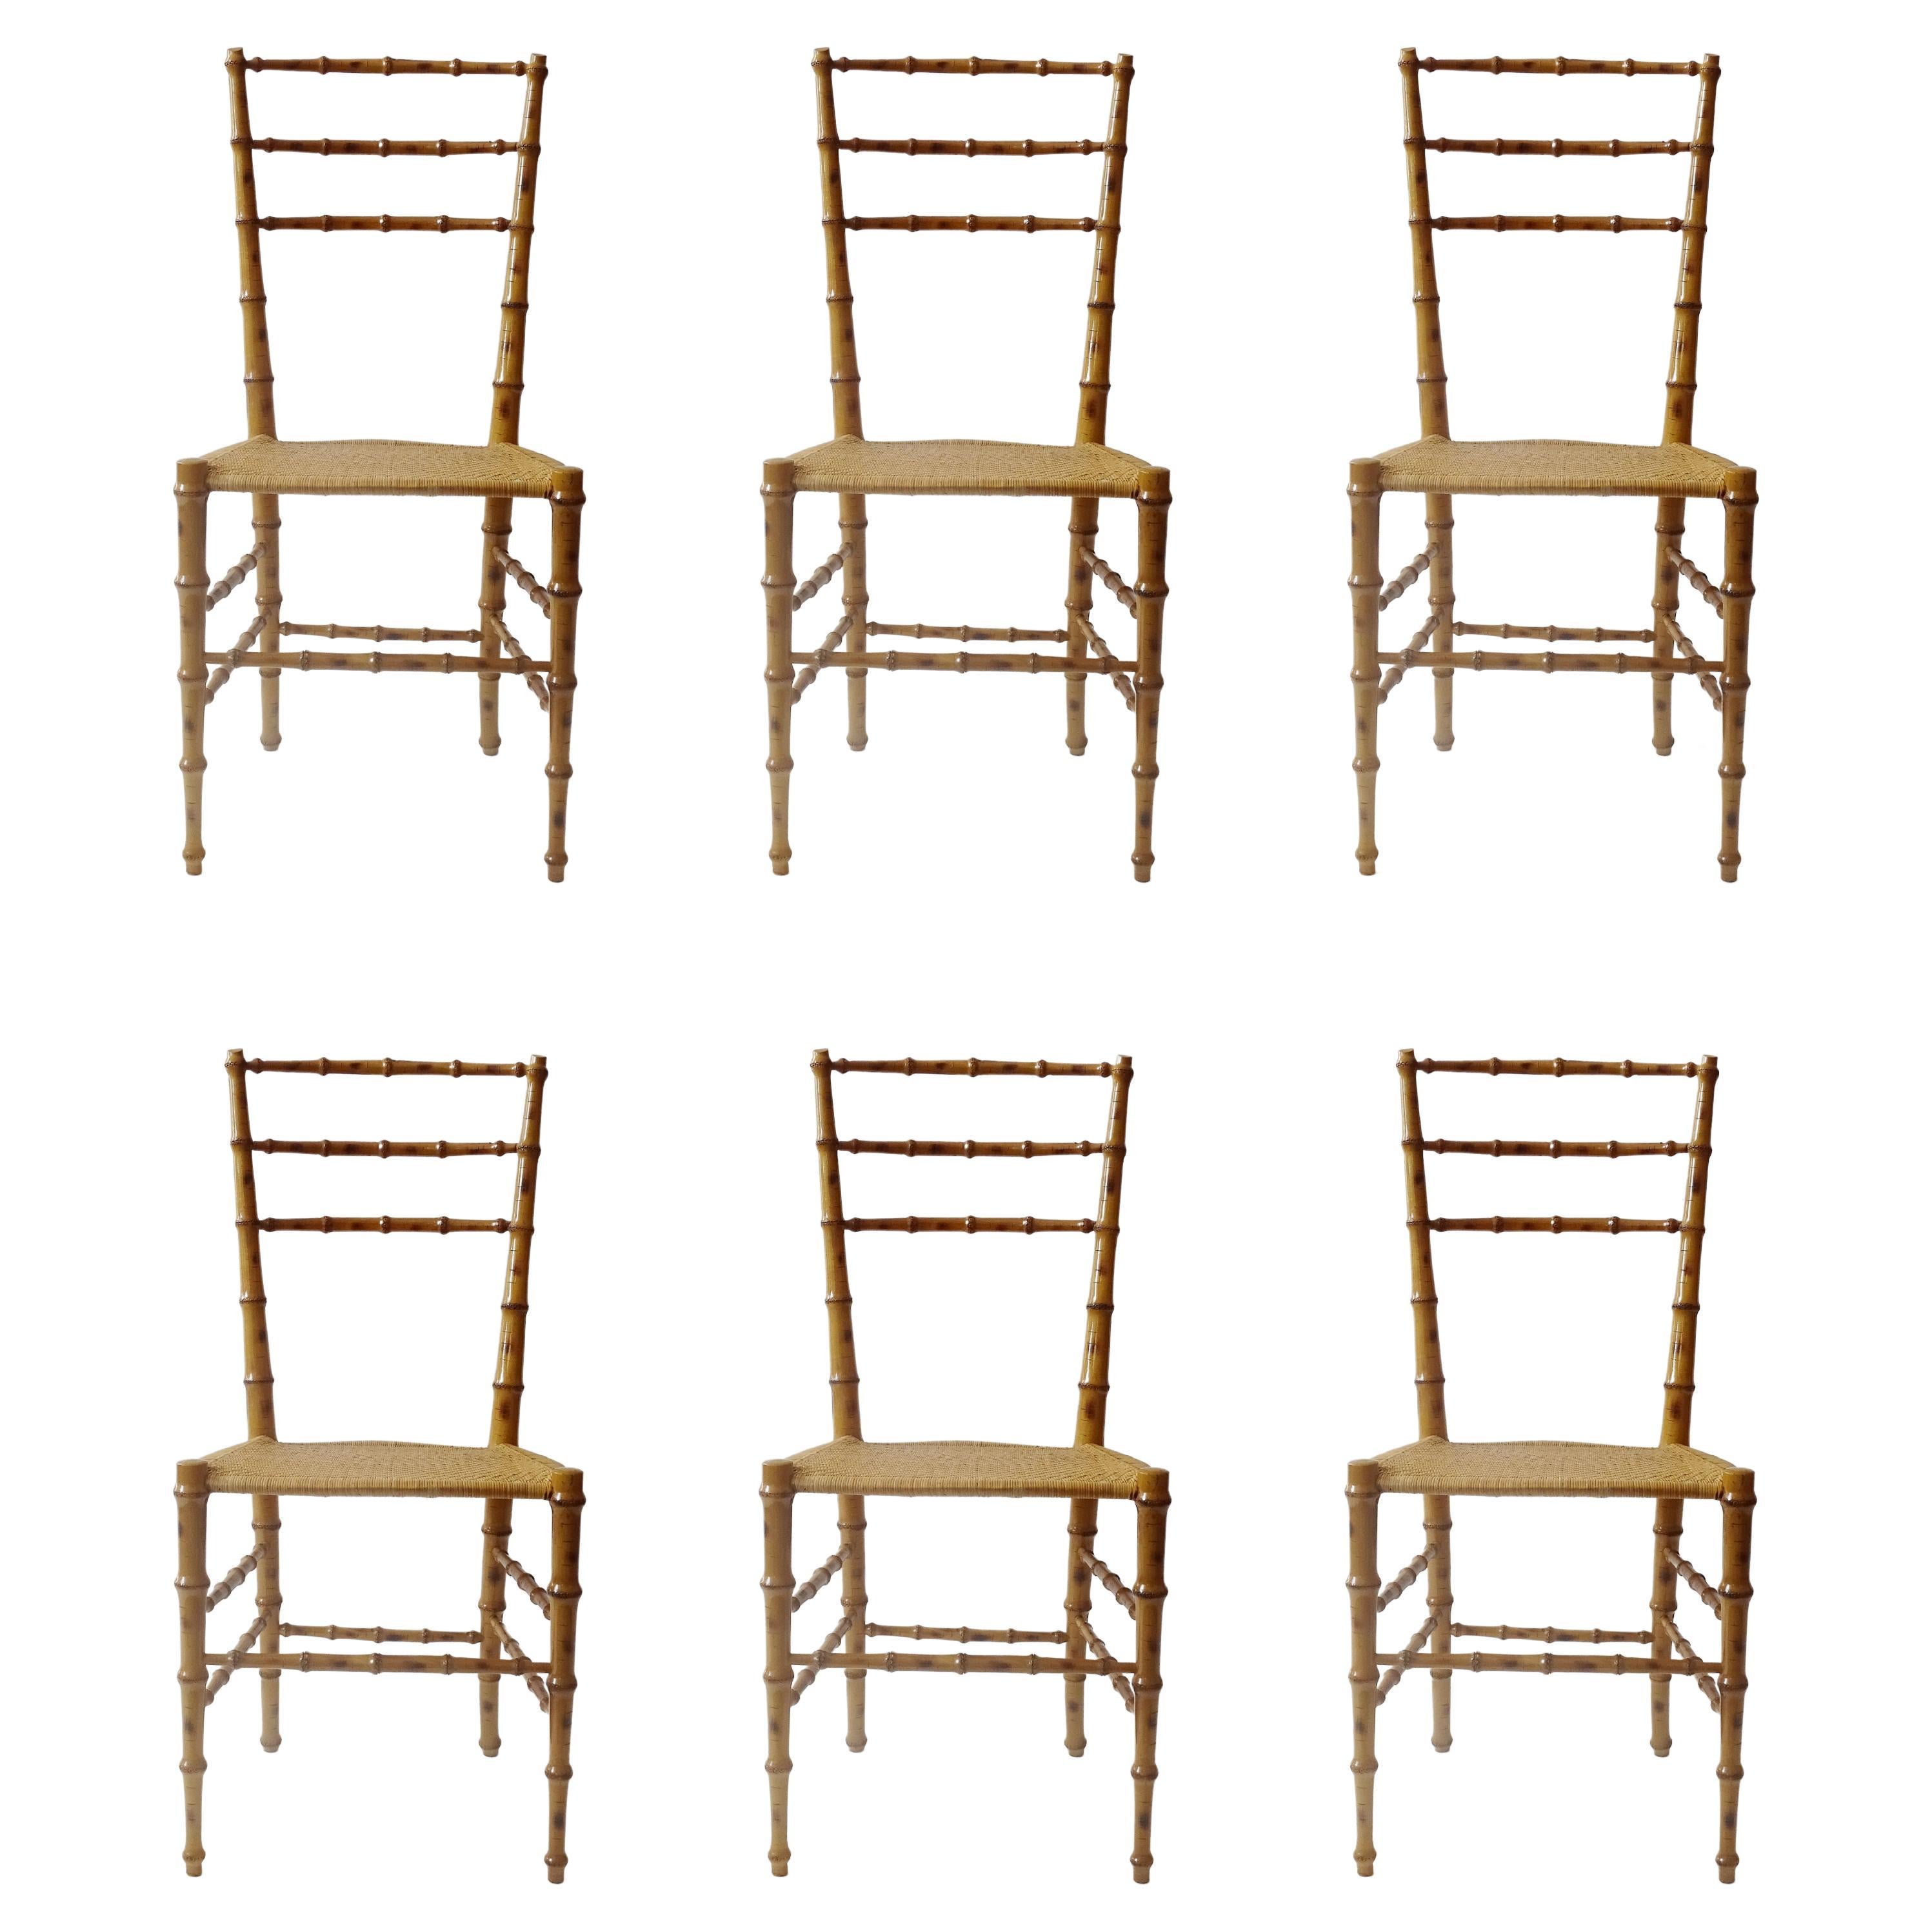 Splendid set of Six Faux Bamboo Chiavarina Chairs, Italy 1950s For Sale